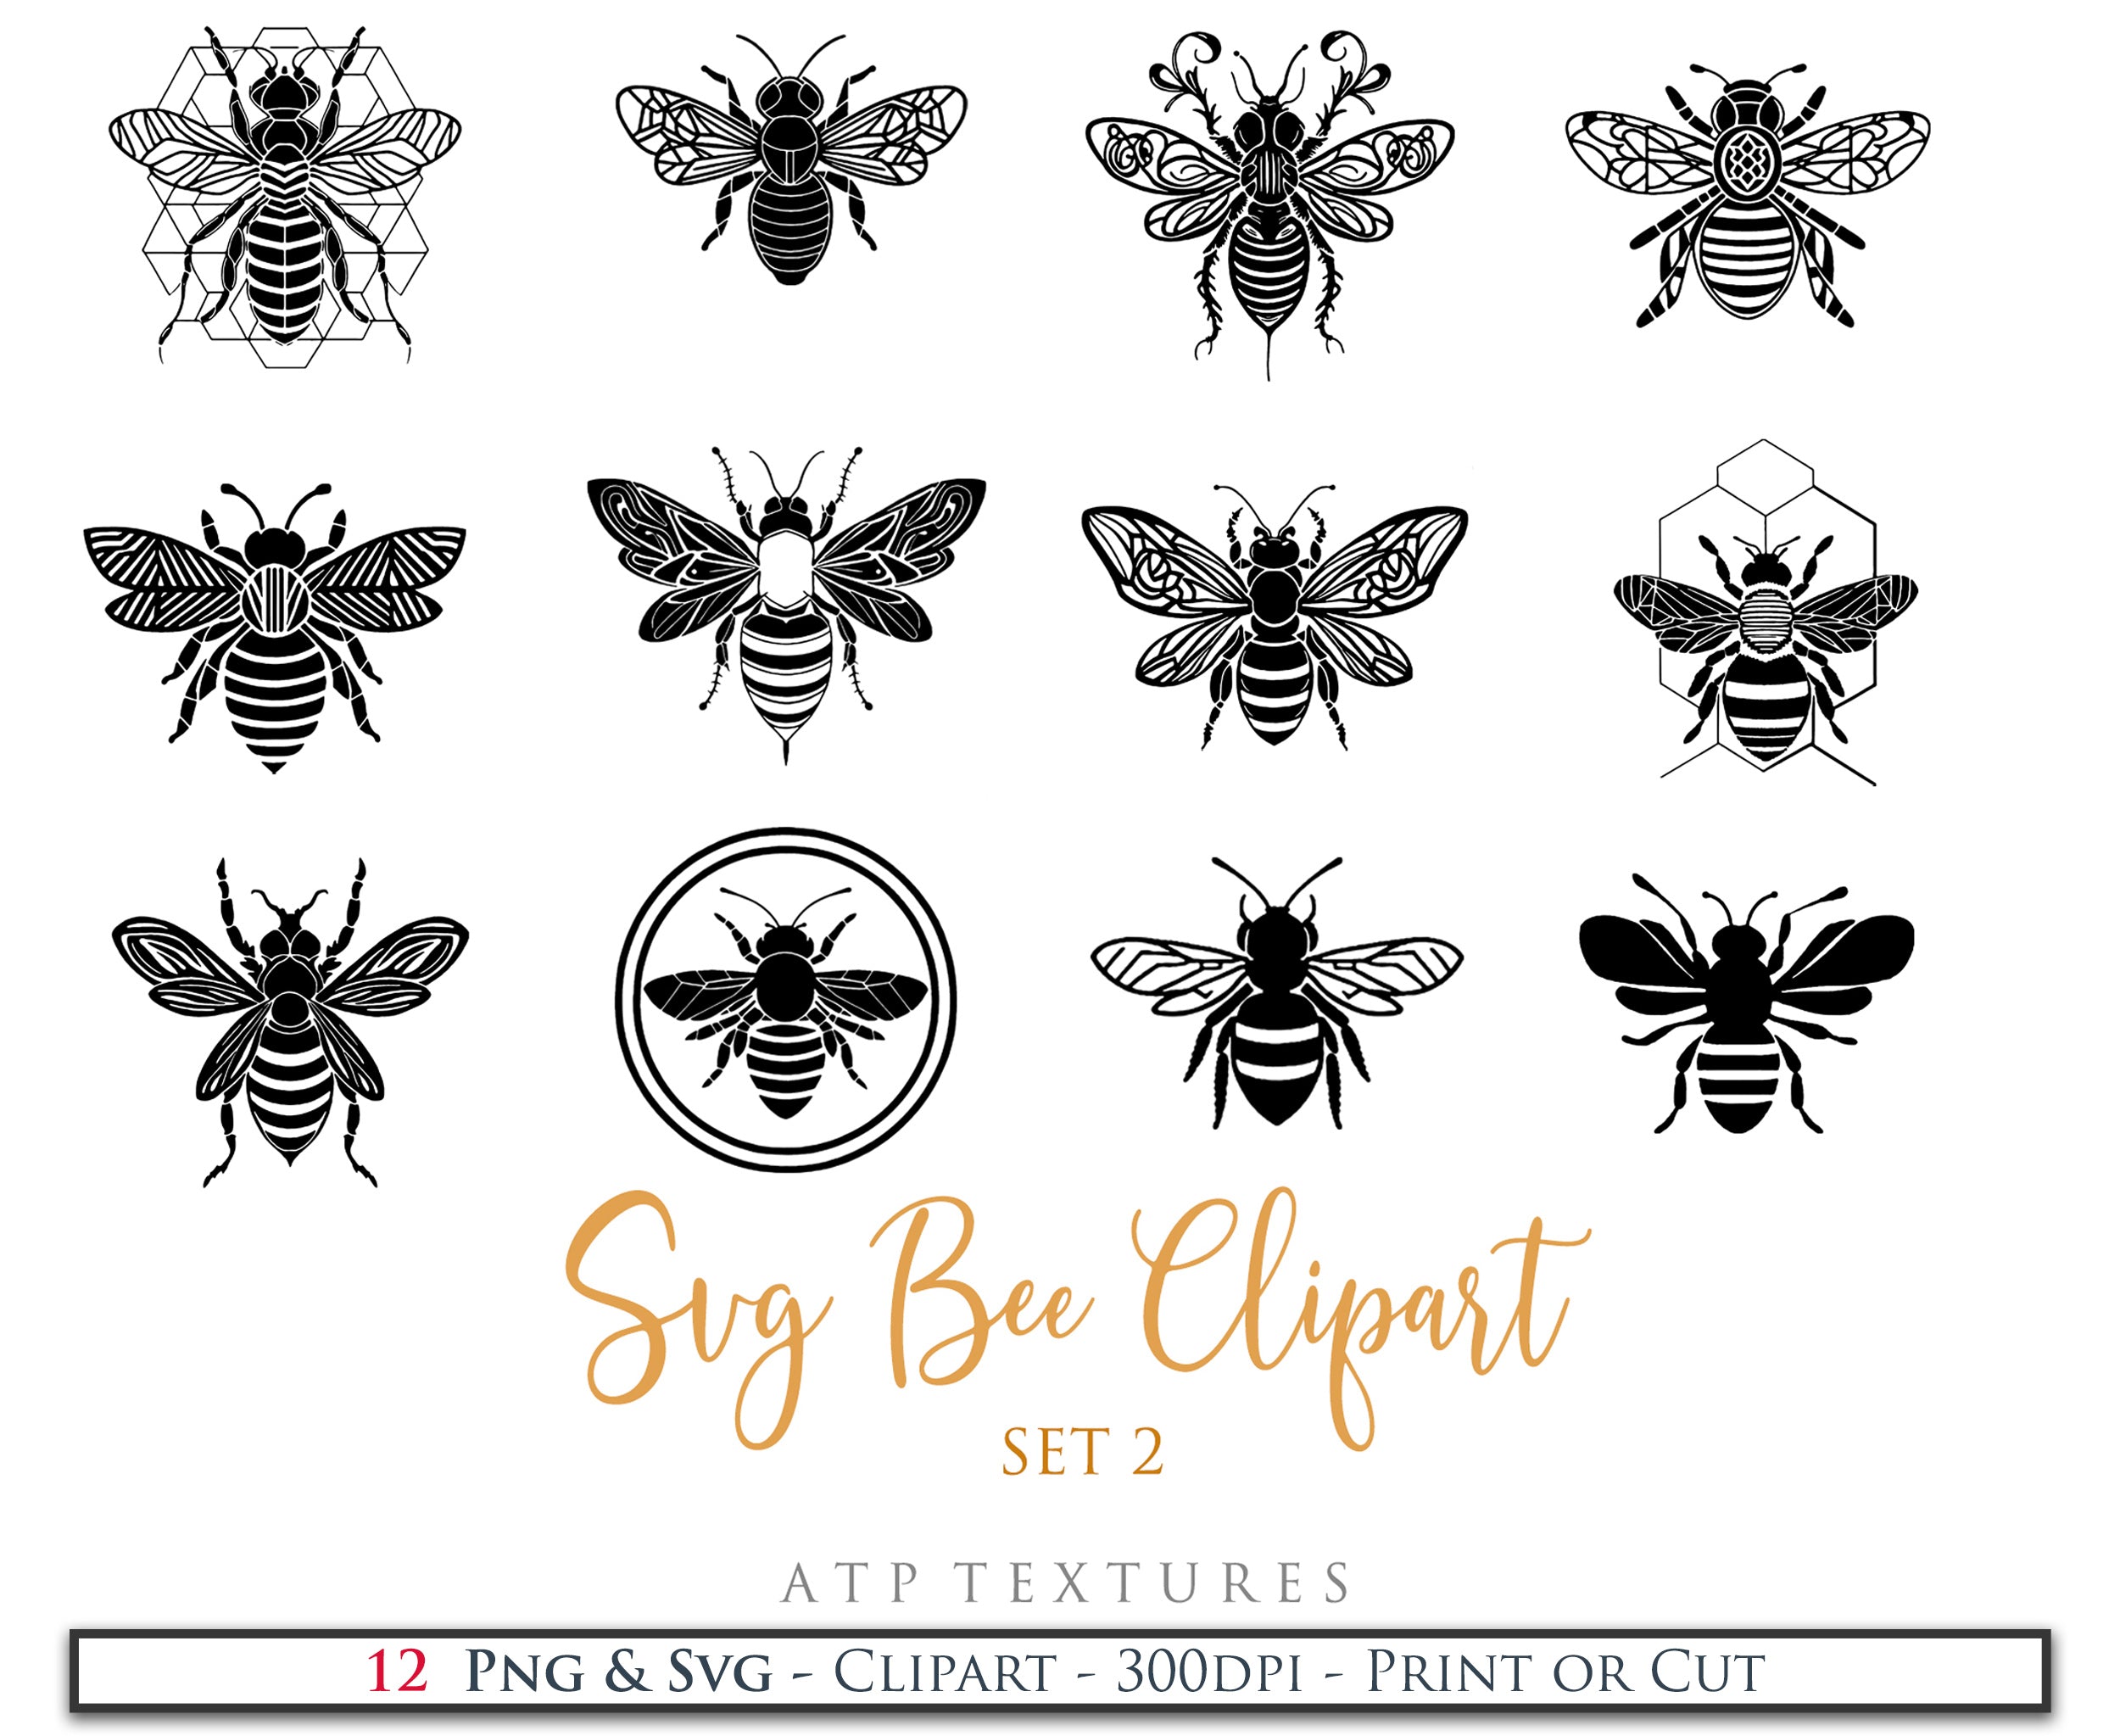 SVG Clipart for Cricut, Digital Art, Sublimation Print and Scrapbooking.Sweet Bees in High resolution.This is a digital product. This set includes 20 SVG & PNG Bee Clipart files. The PNG files are all in high resolution,300dpi.If you wish to use them for your fine art prints and photography edits without losing quality, you can!